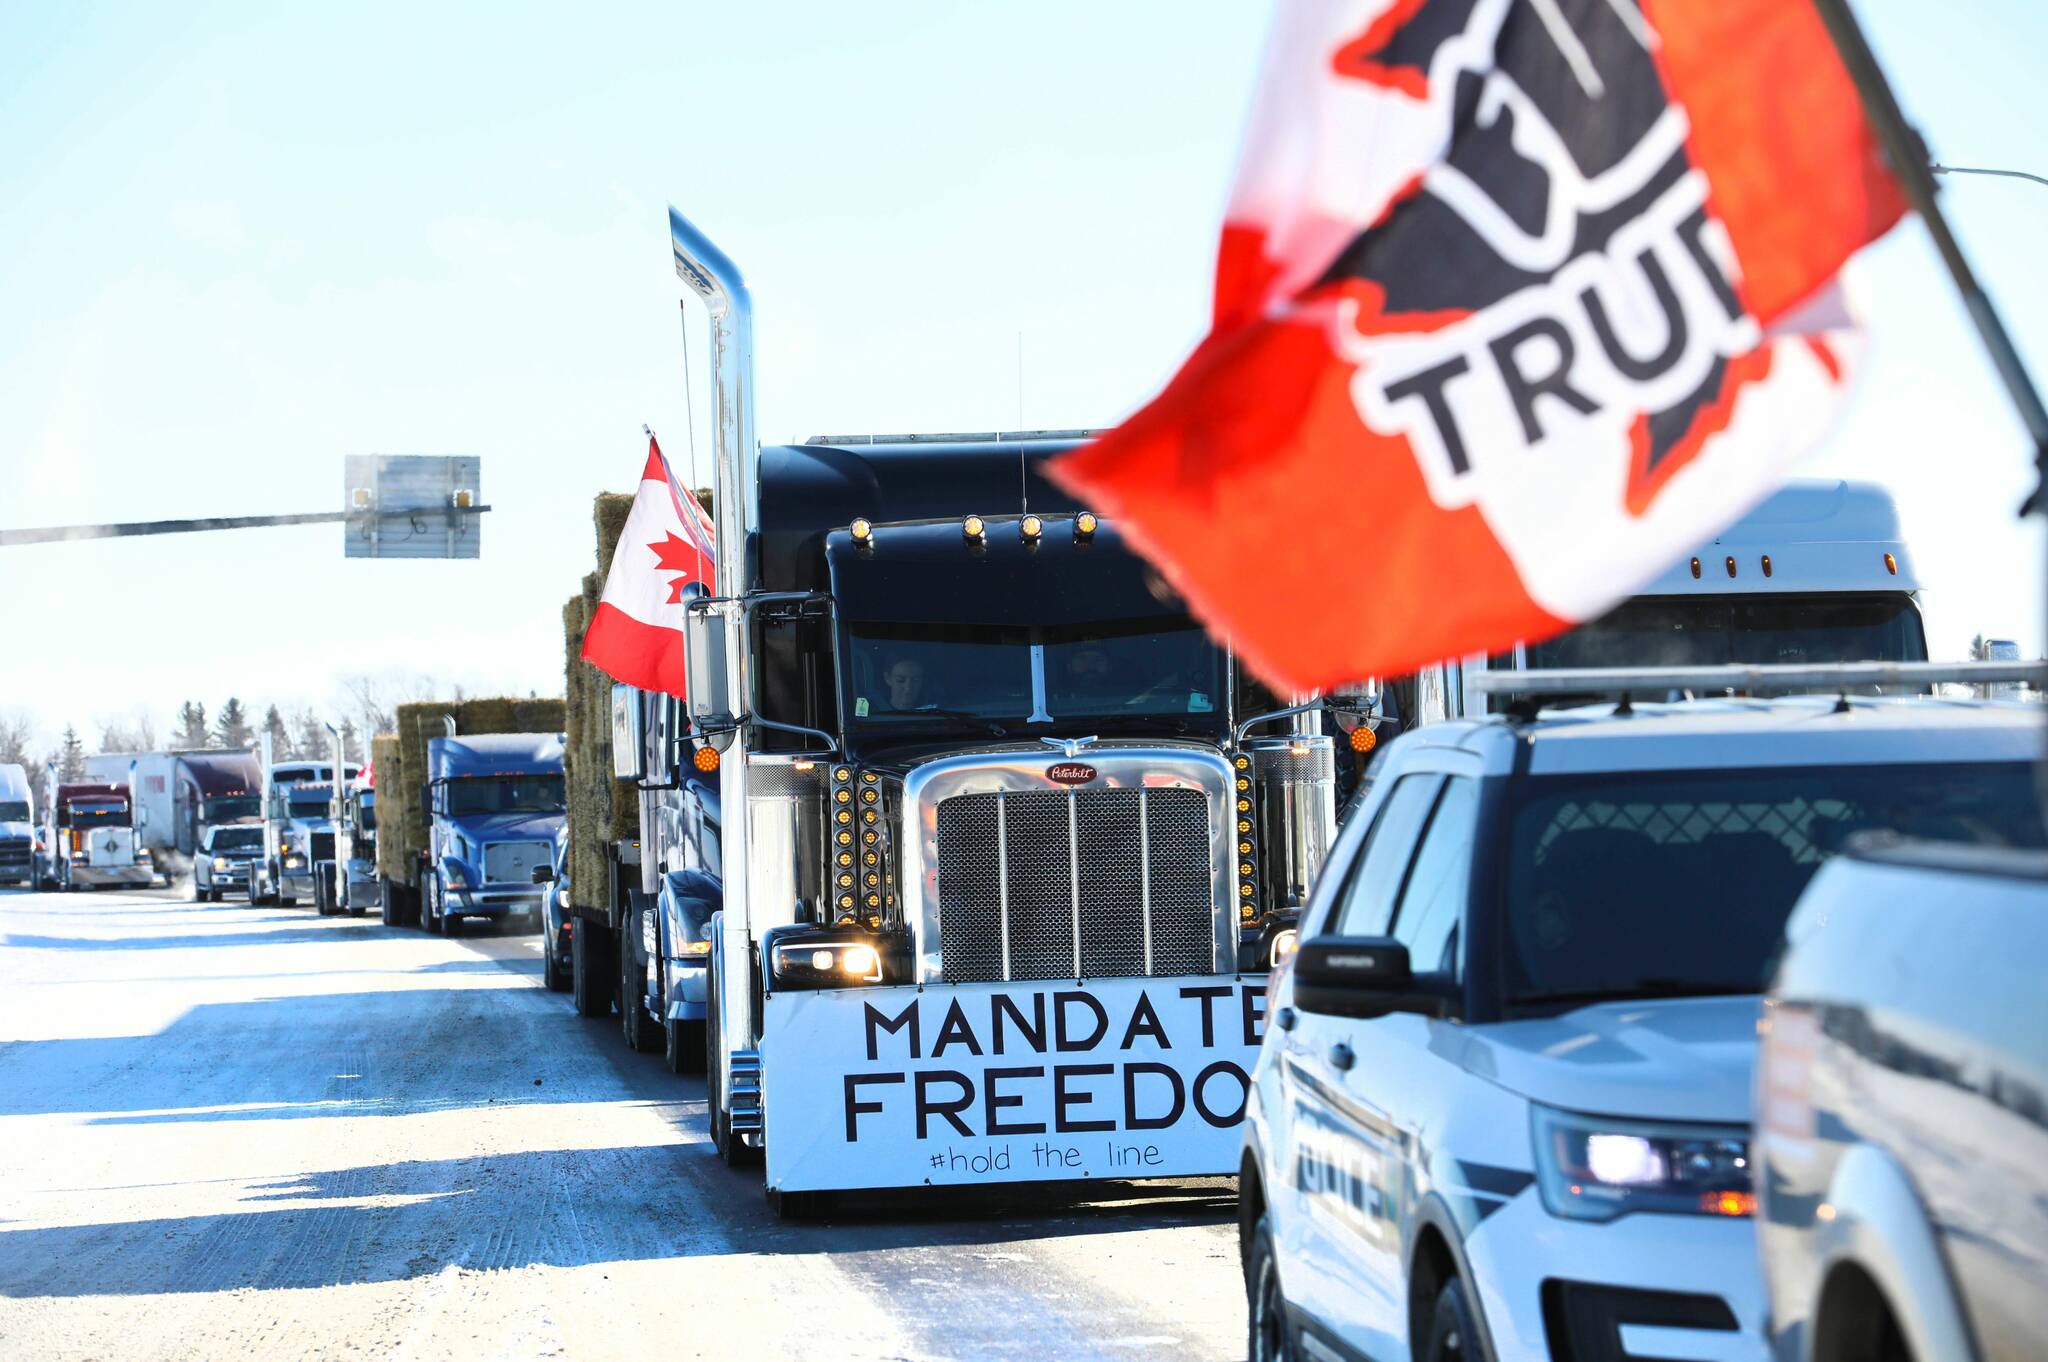 The Canadian government used an emergency law to stop the freedom convoy, which was ruled illegal by a federal court